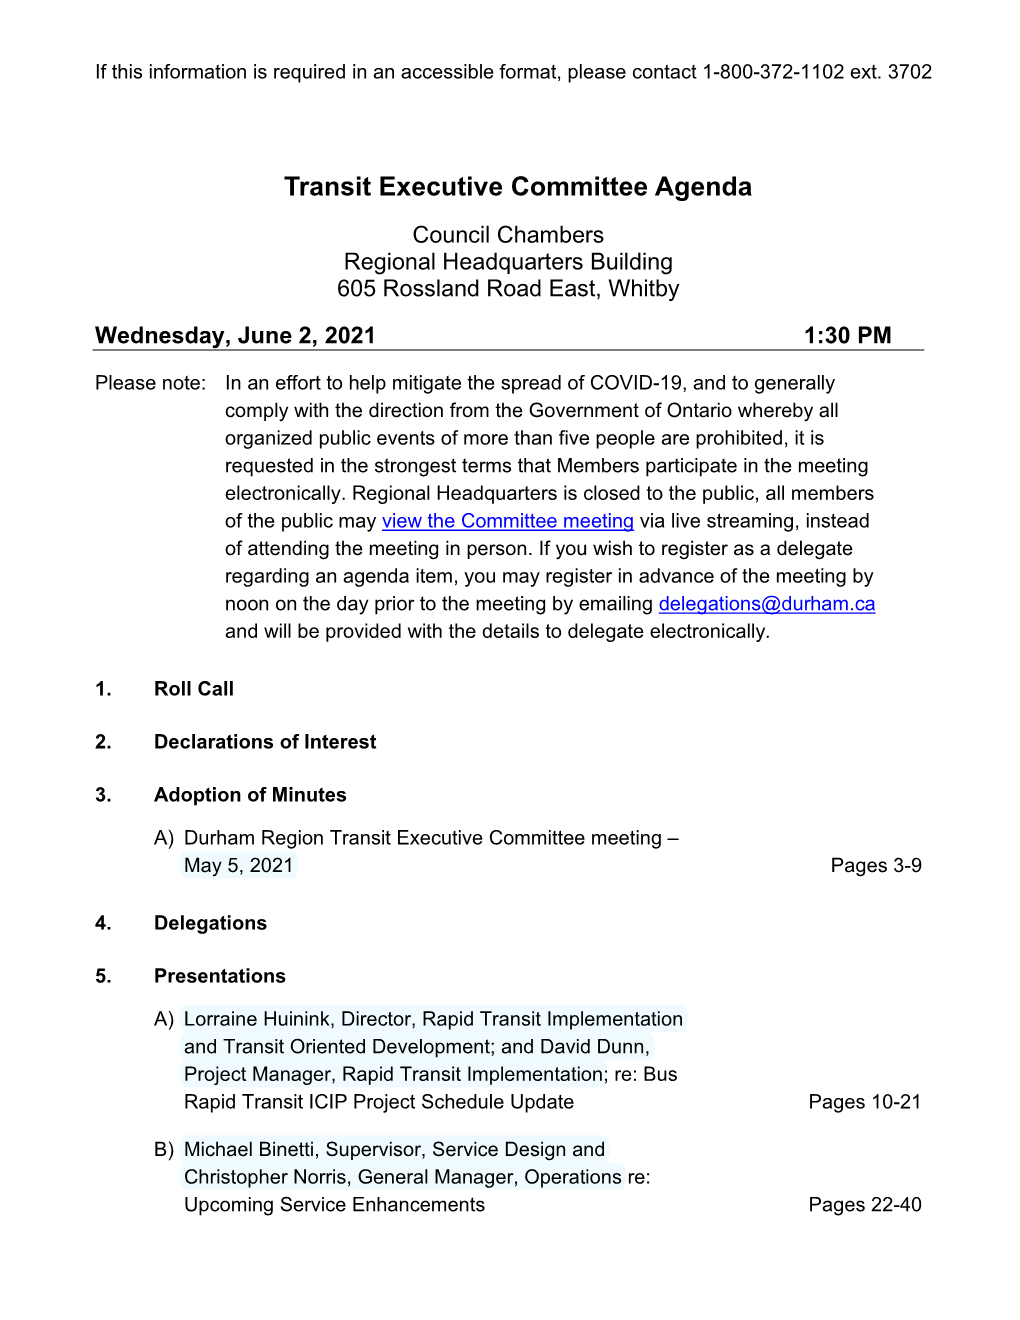 Transit Executive Committee Agenda Council Chambers Regional Headquarters Building 605 Rossland Road East, Whitby